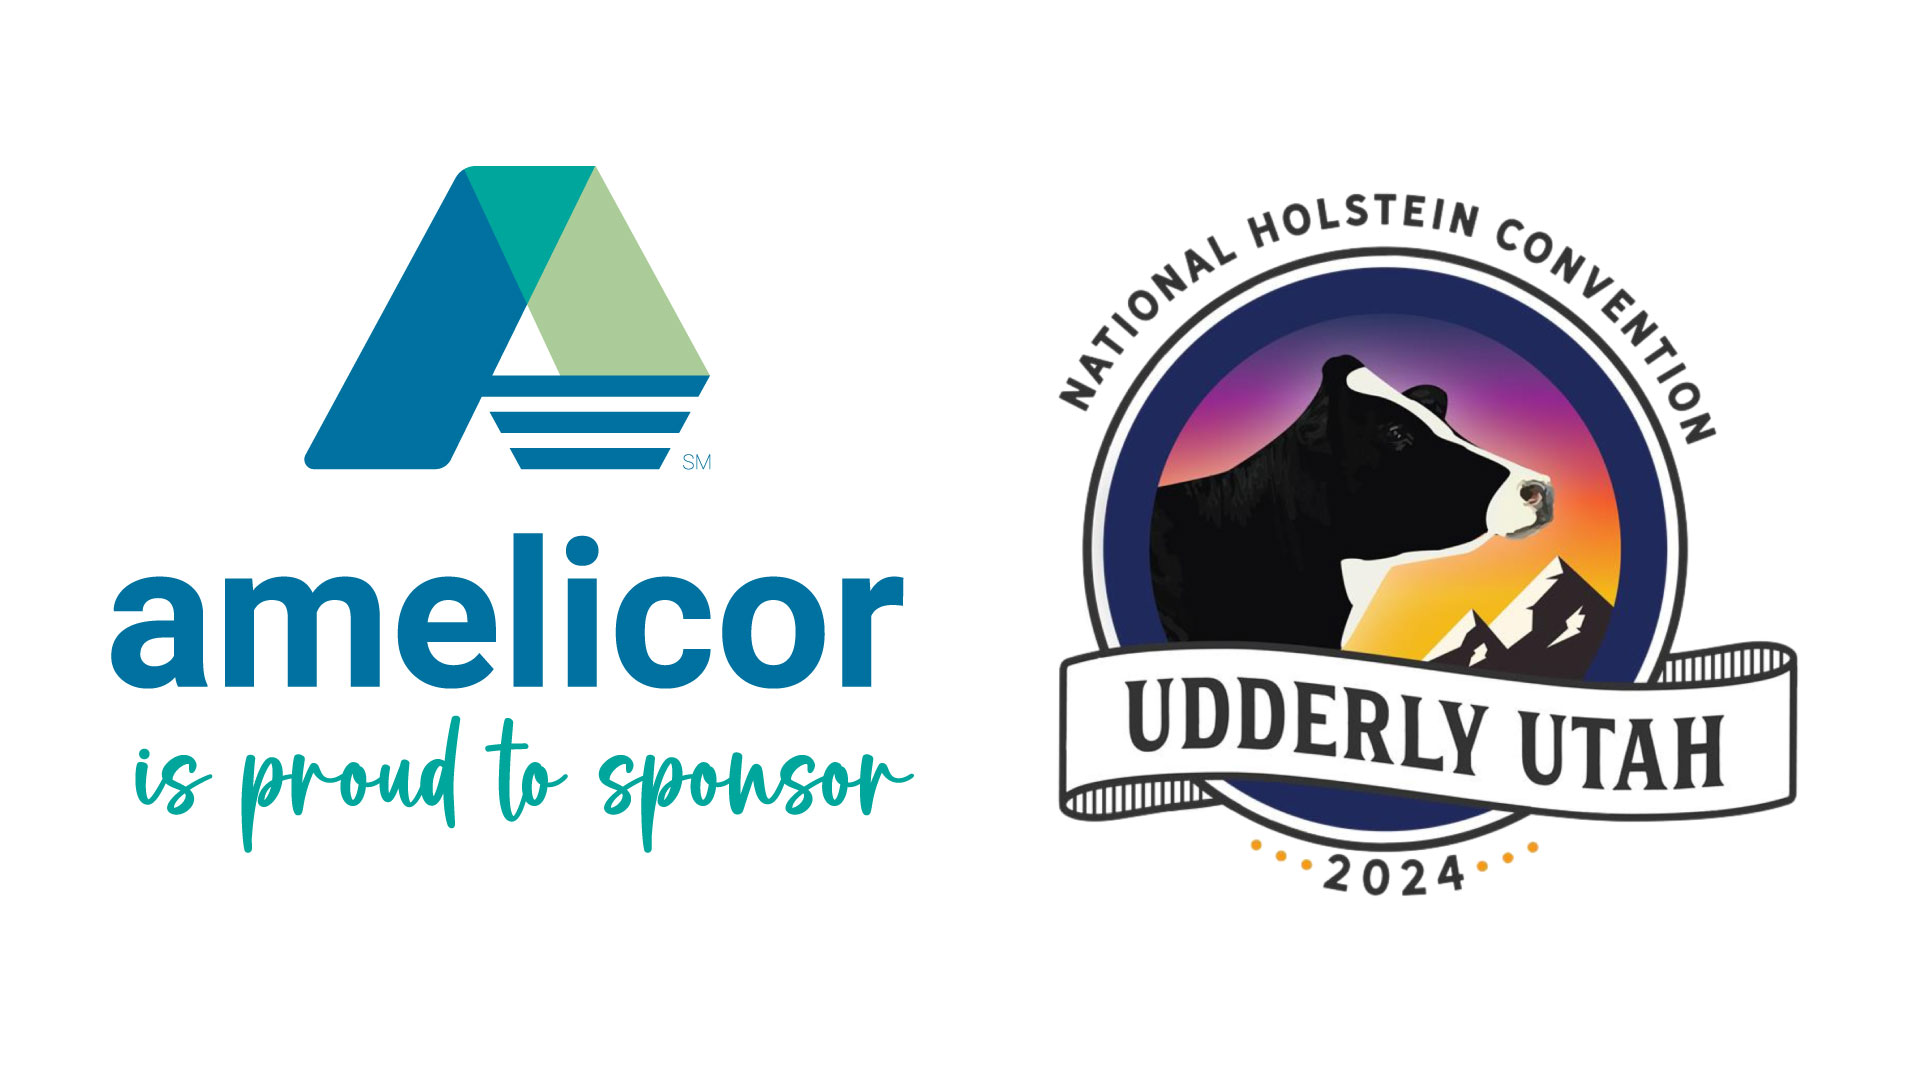 Amelicor is proud to sponsor the National Holstein Convention